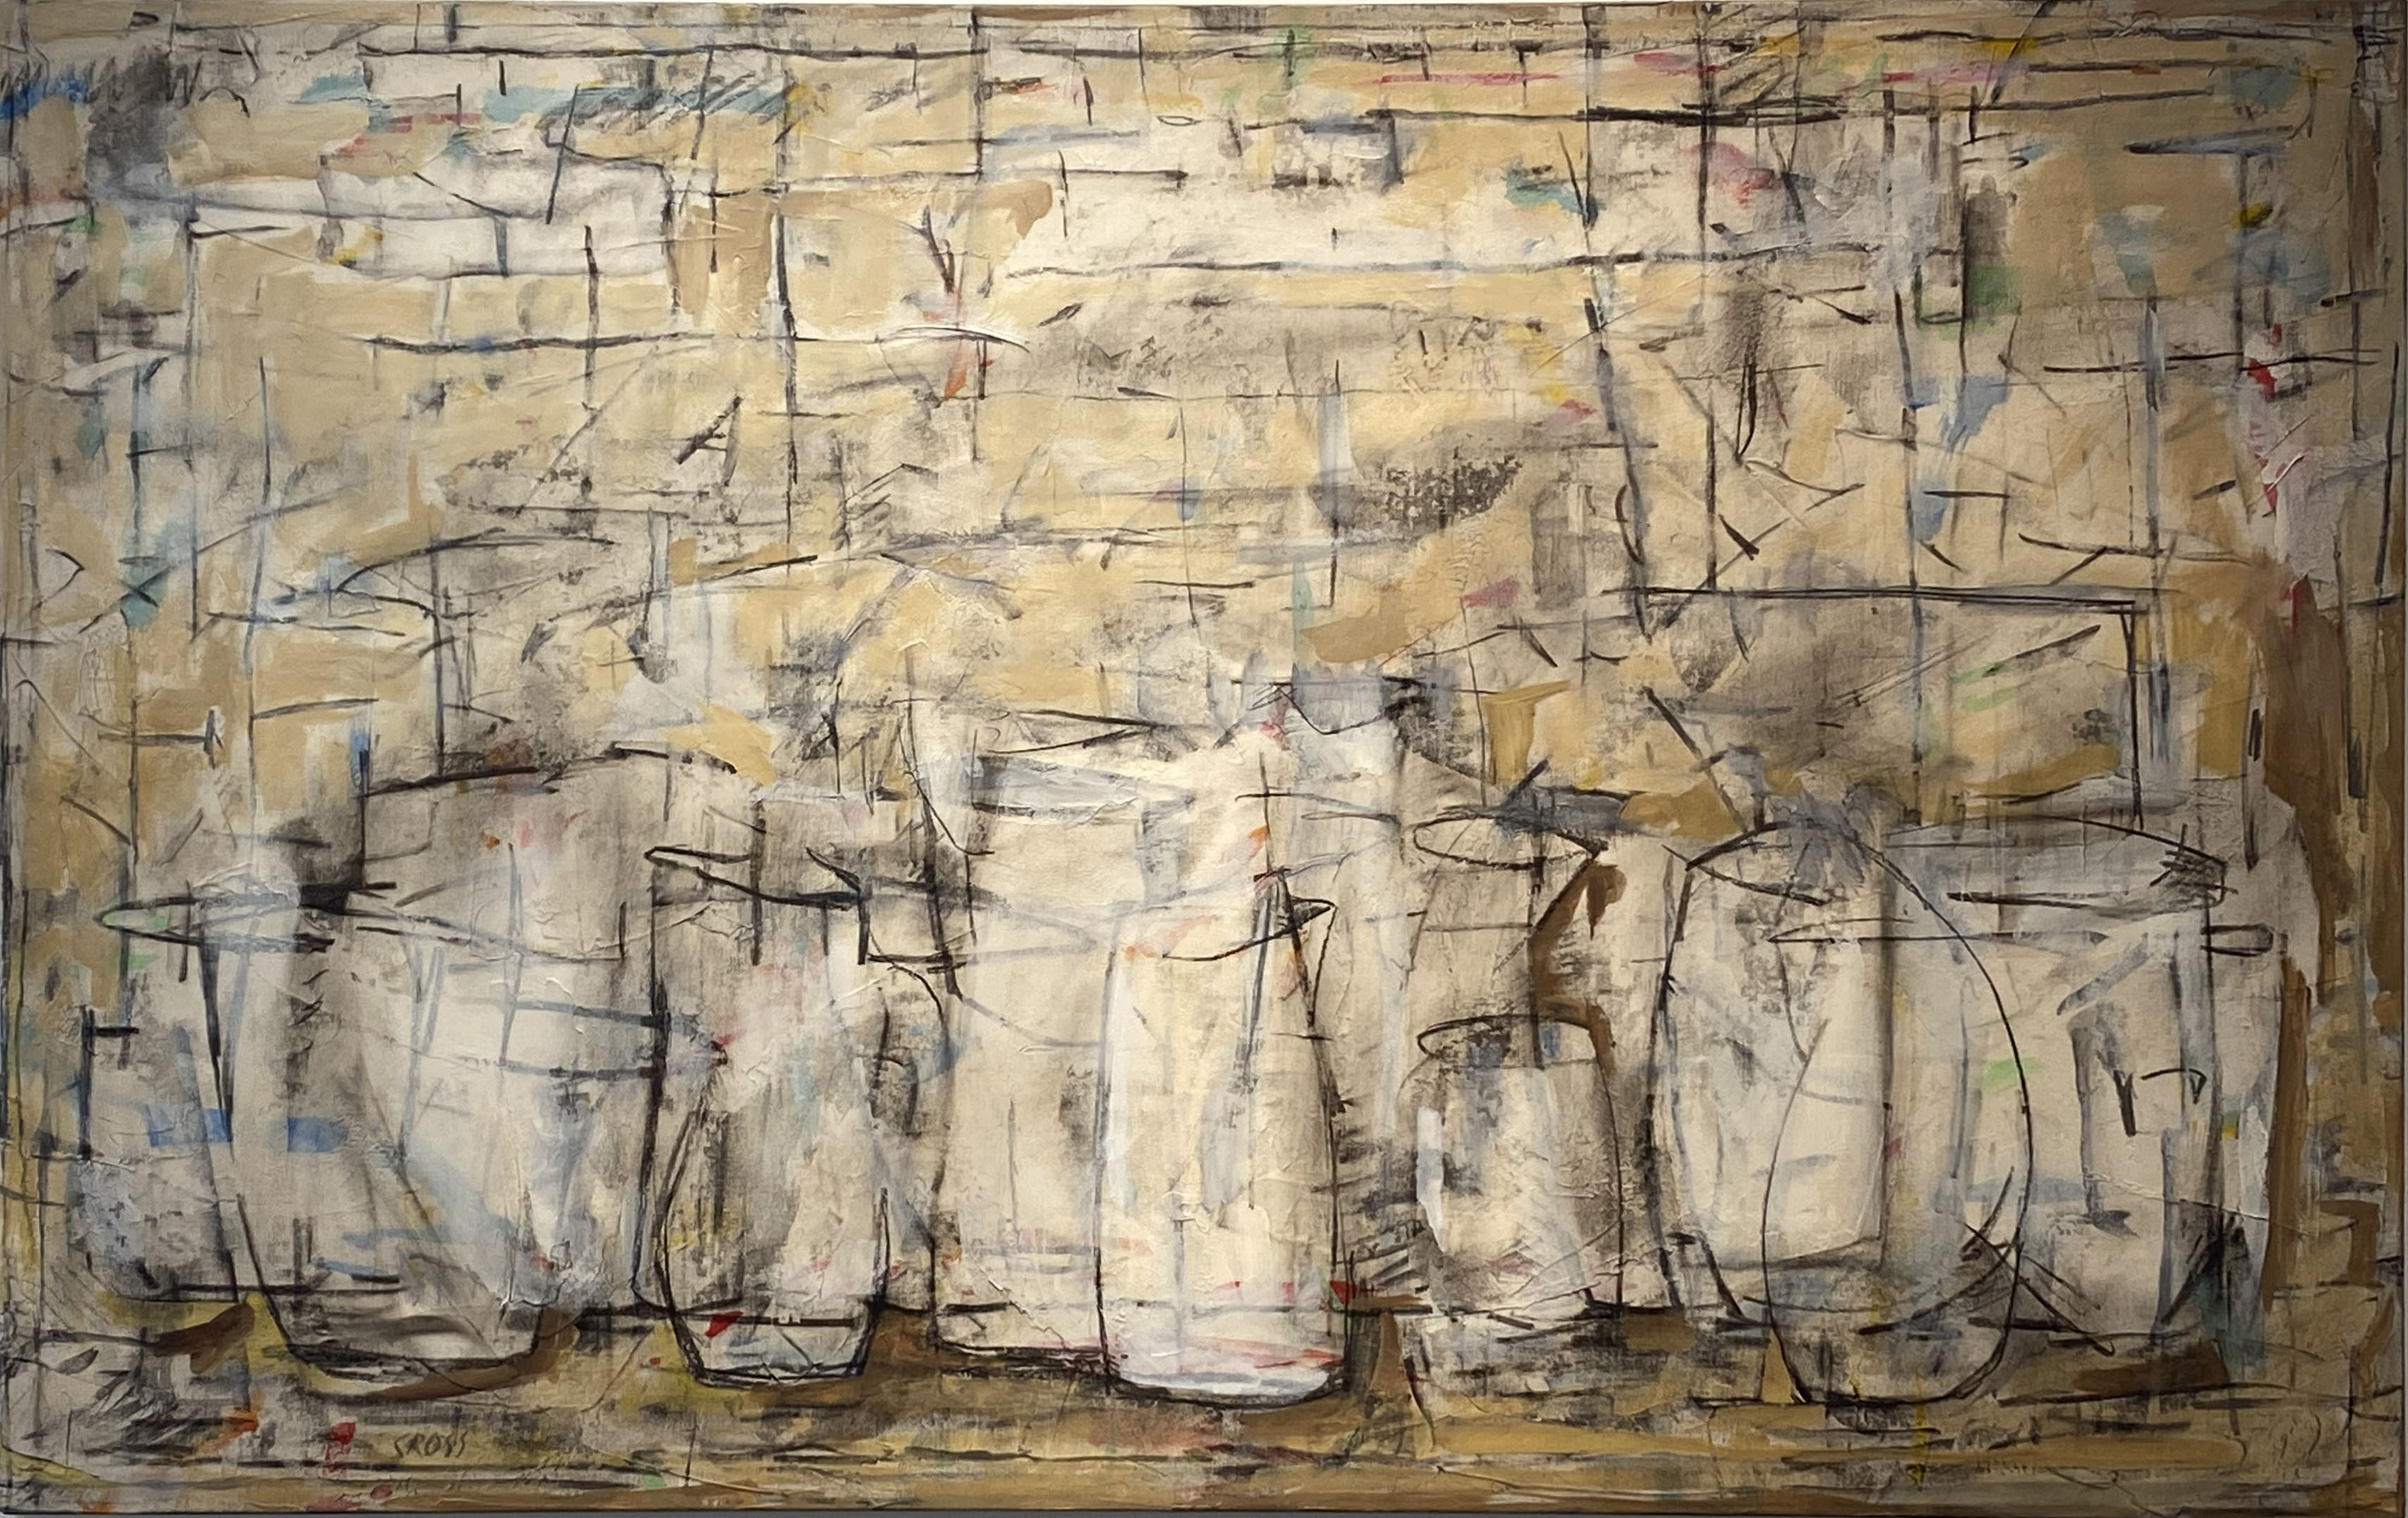 BISQUE FIRE, acrylic and charcoal on canvas, 34.25 x 54.25 in.